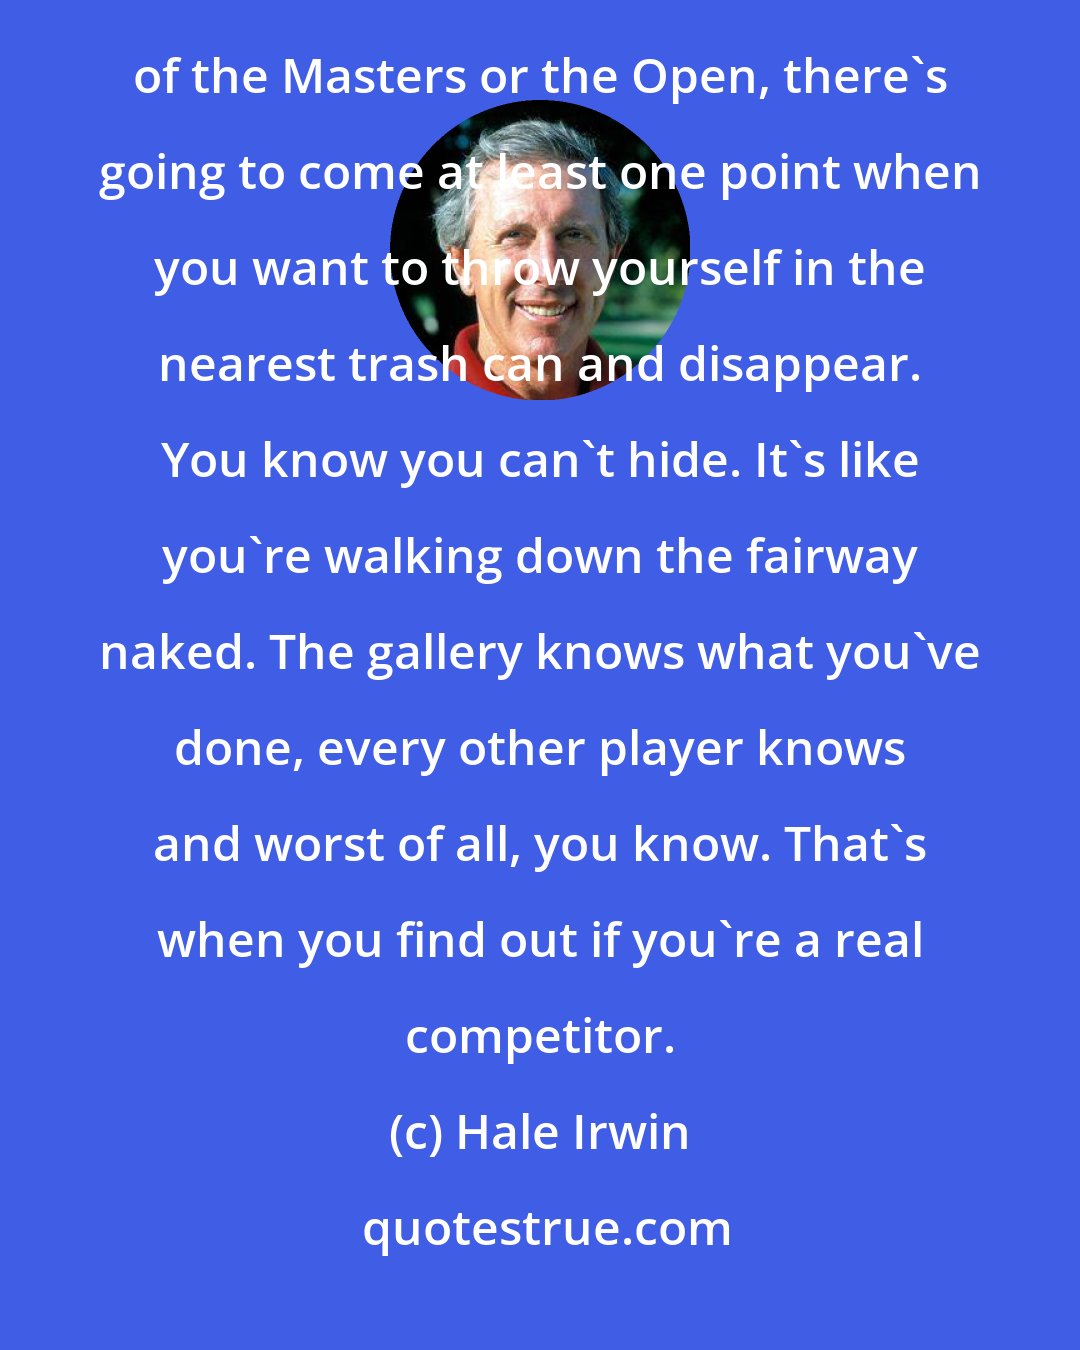 Hale Irwin: You can talk about strategy all you want, but what really matters is resilience. On the last nine holes of the Masters or the Open, there's going to come at least one point when you want to throw yourself in the nearest trash can and disappear. You know you can't hide. It's like you're walking down the fairway naked. The gallery knows what you've done, every other player knows and worst of all, you know. That's when you find out if you're a real competitor.